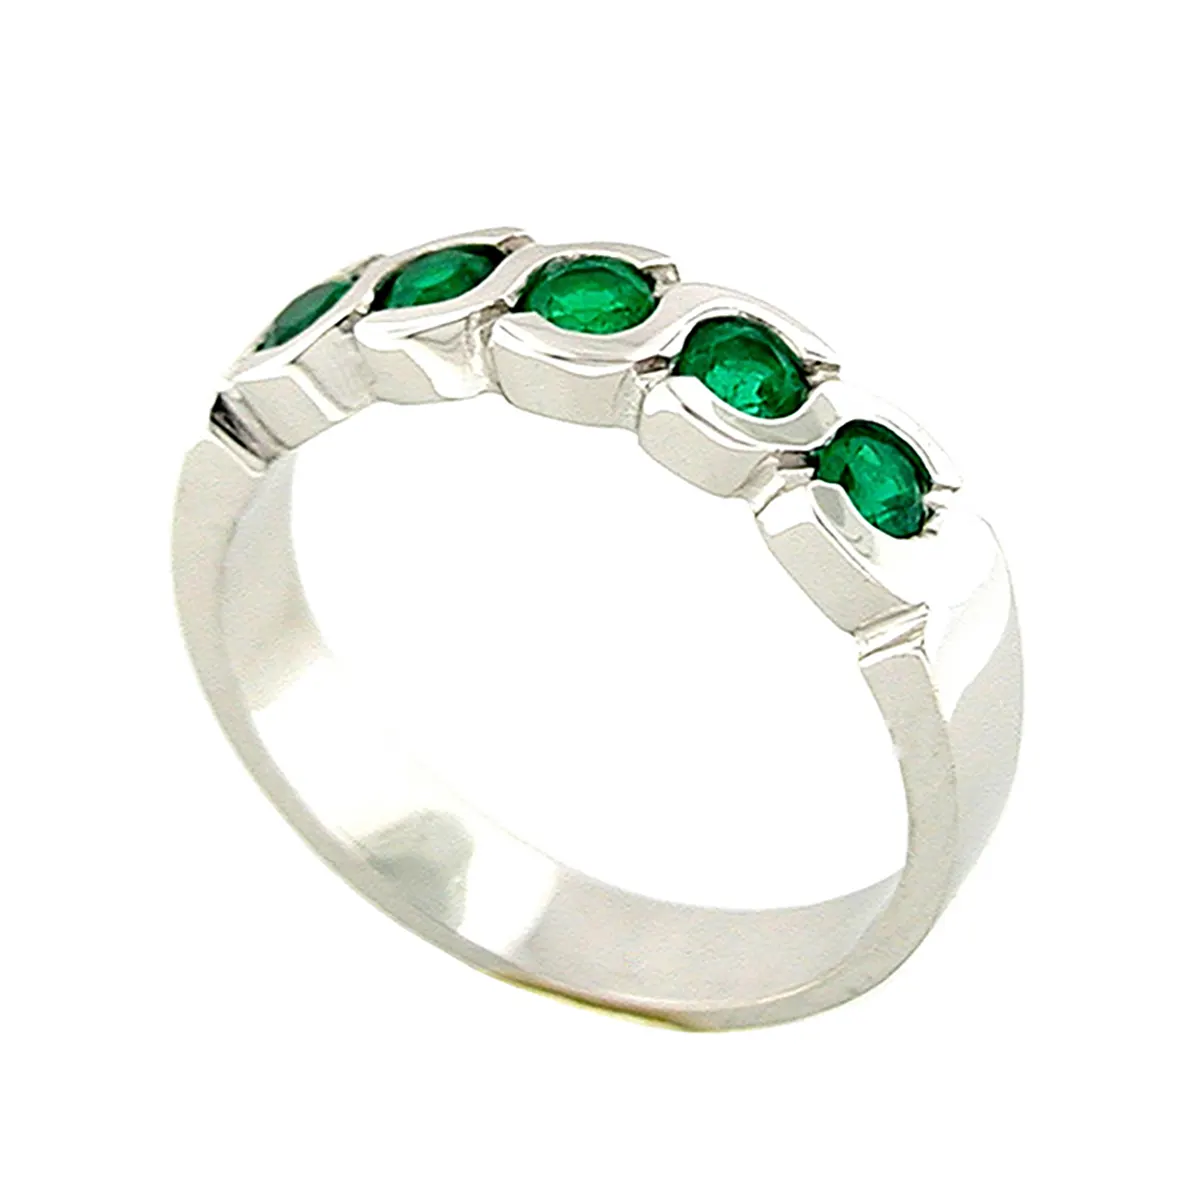 Emerald Band Ring with Round Cut Emeralds Set in 18K White Gold Bezel Setting